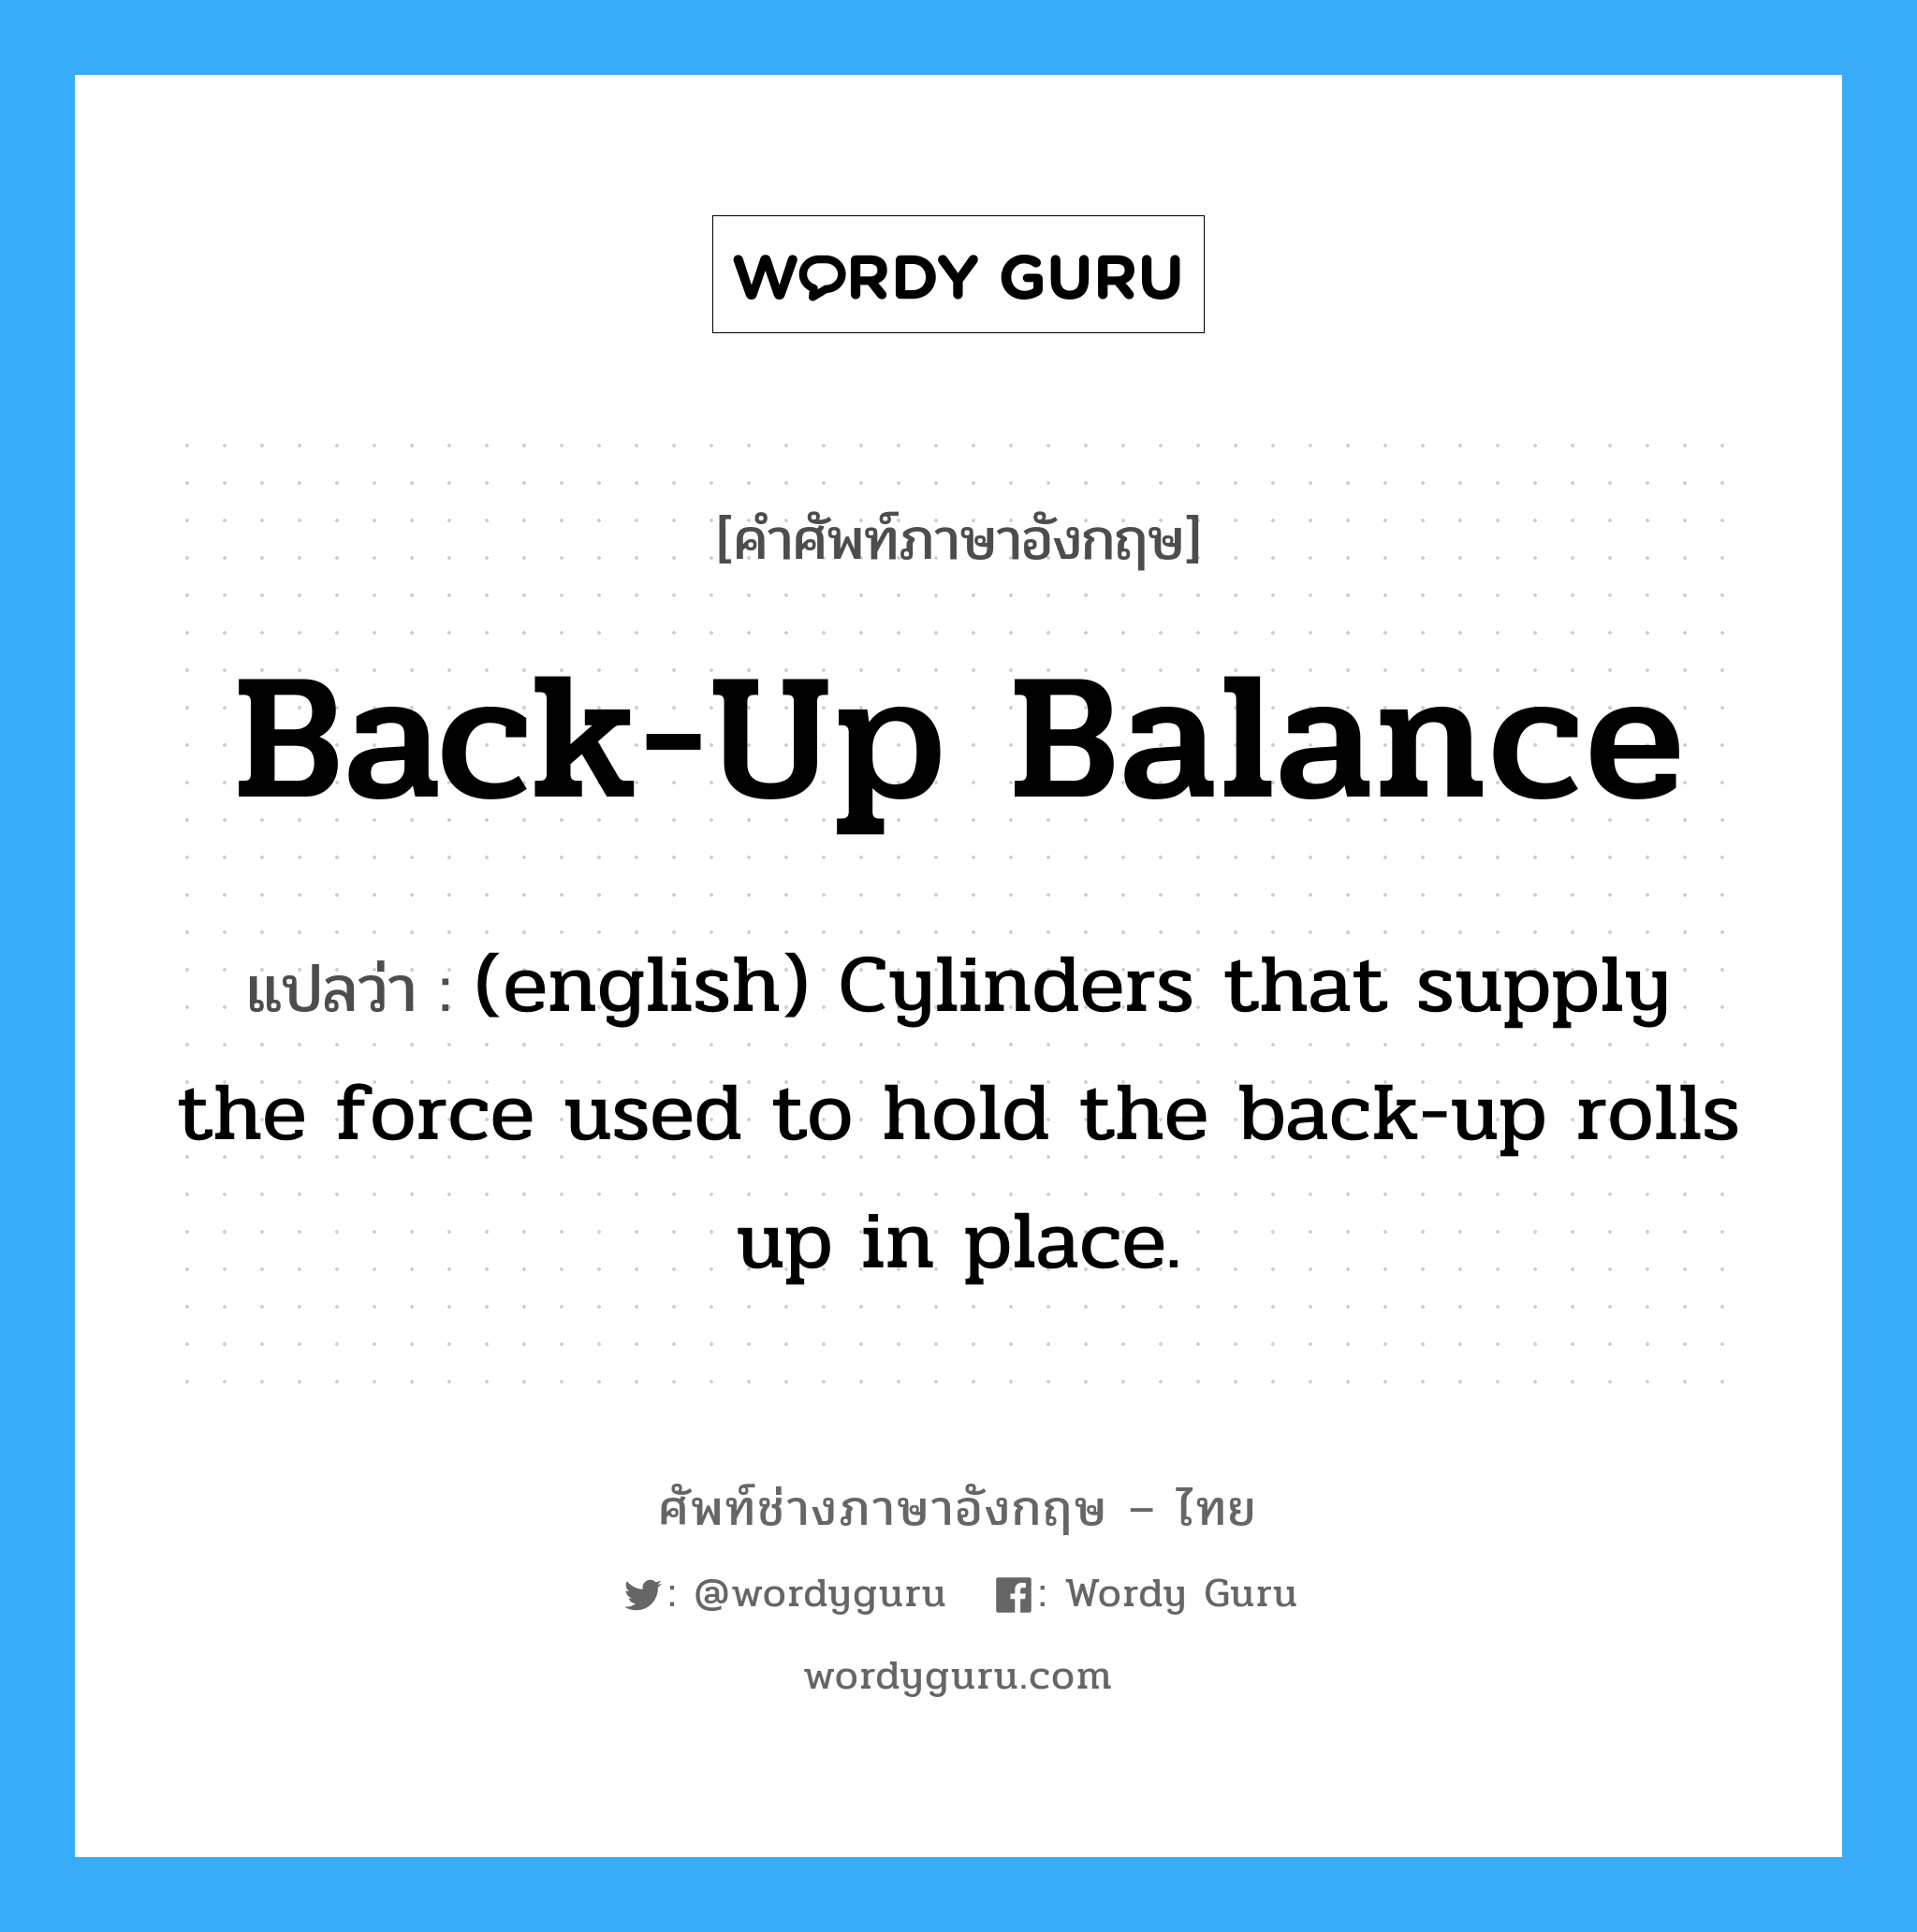 (english) Cylinders that supply the force used to hold the back-up rolls up in place. ภาษาอังกฤษ?, คำศัพท์ช่างภาษาอังกฤษ - ไทย (english) Cylinders that supply the force used to hold the back-up rolls up in place. คำศัพท์ภาษาอังกฤษ (english) Cylinders that supply the force used to hold the back-up rolls up in place. แปลว่า Back-up Balance